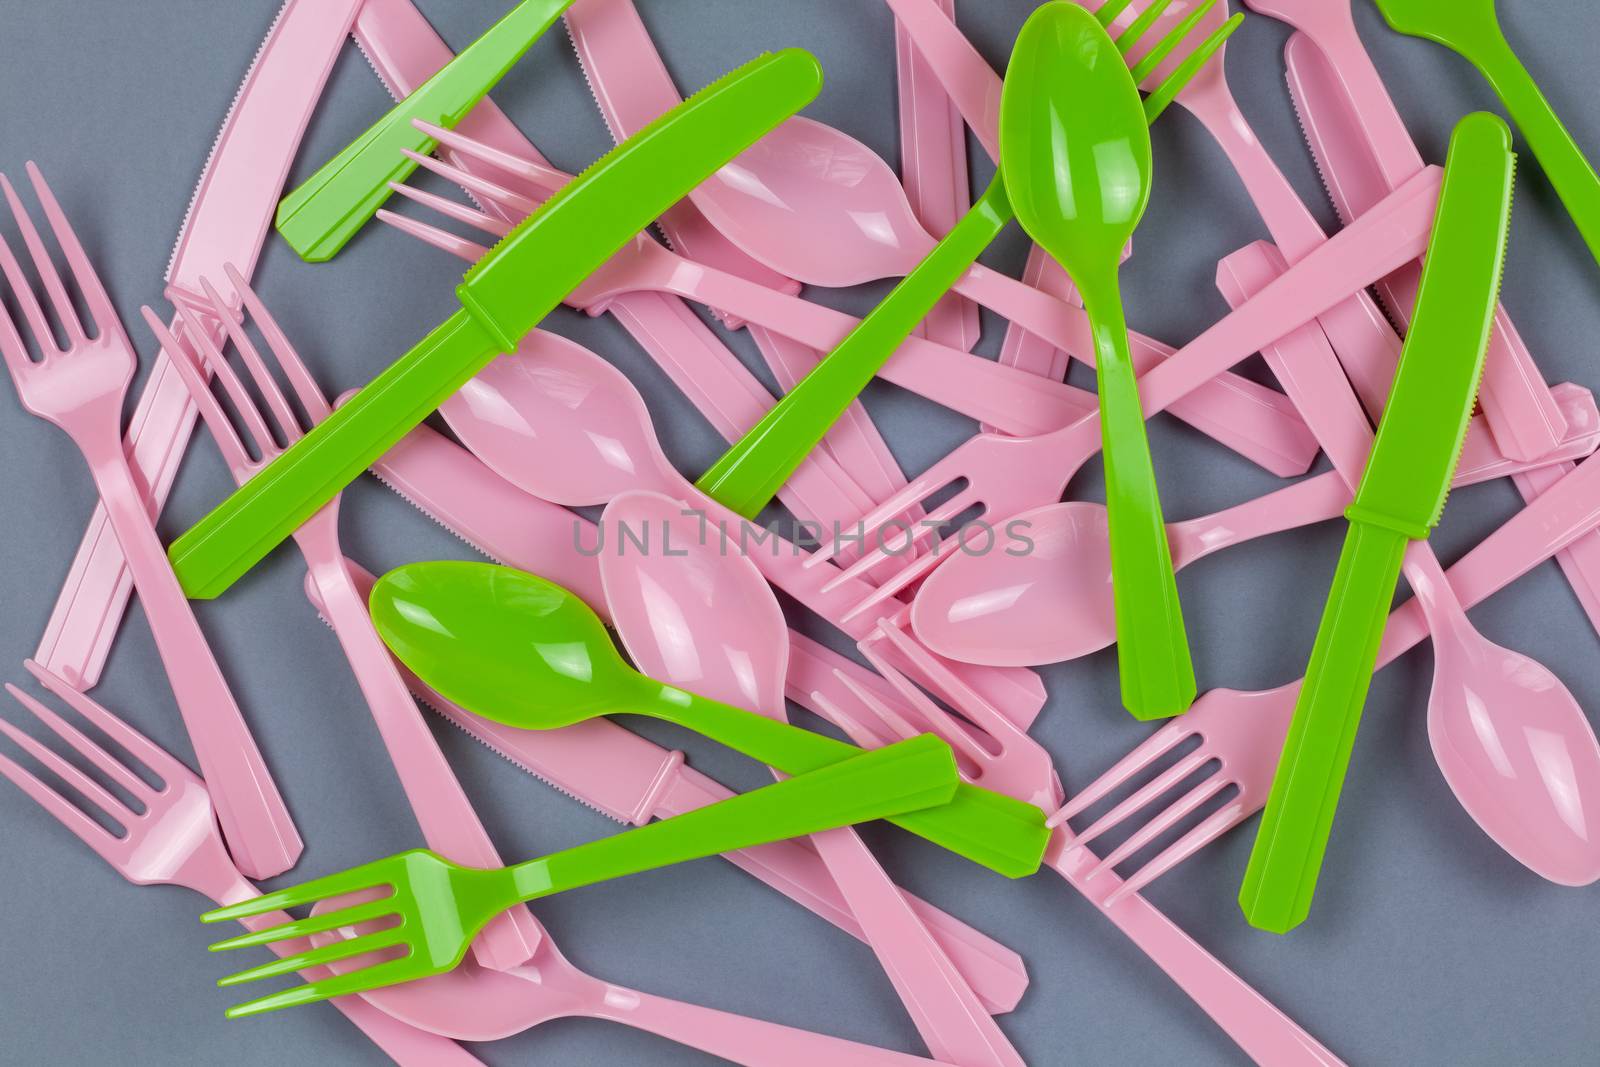 Background from reusable recyclable pink and green forks, spoons, knifes made from corn starch on grey paper. Eco, zero waste, alternative to plastic concept. Flat lay, top view. Horizontal. Closeup.